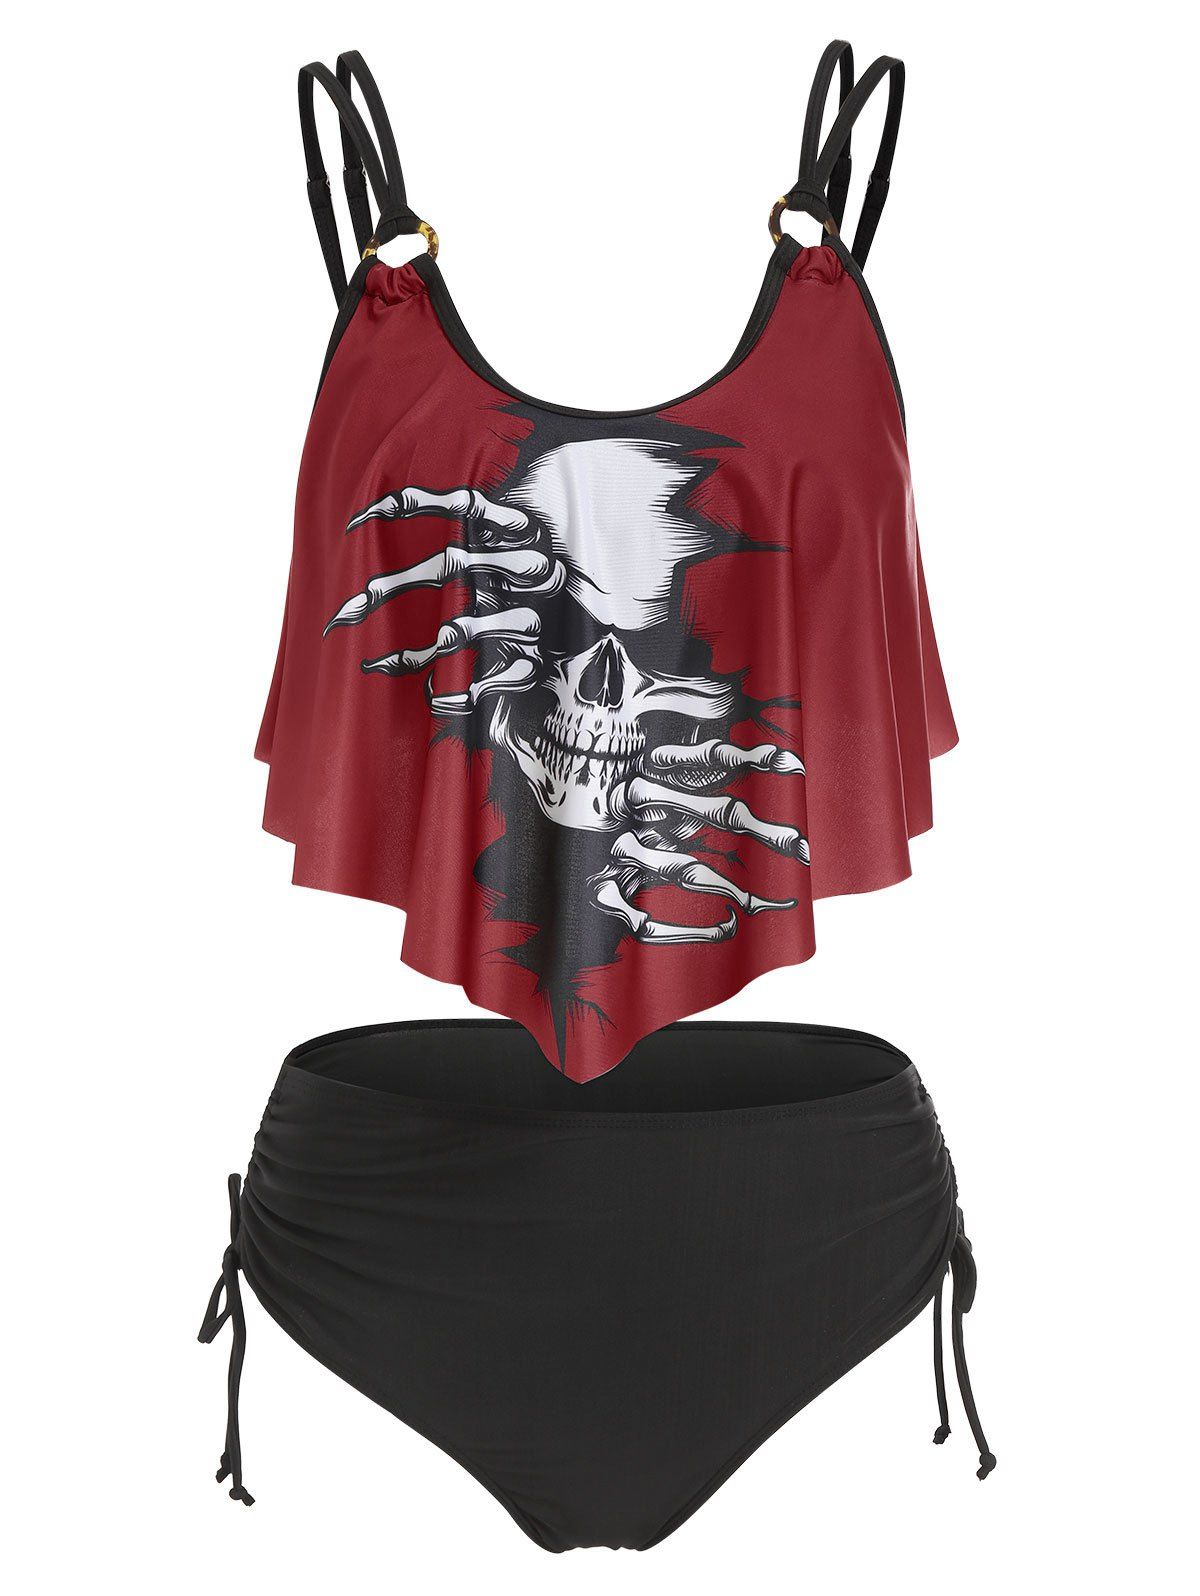 Tummy Control Tankini Swimwear Gothic Swimsuit Skeleton Skull Print Strappy Cinched Ruched Summer Beach Bathing Suit - BLACK L